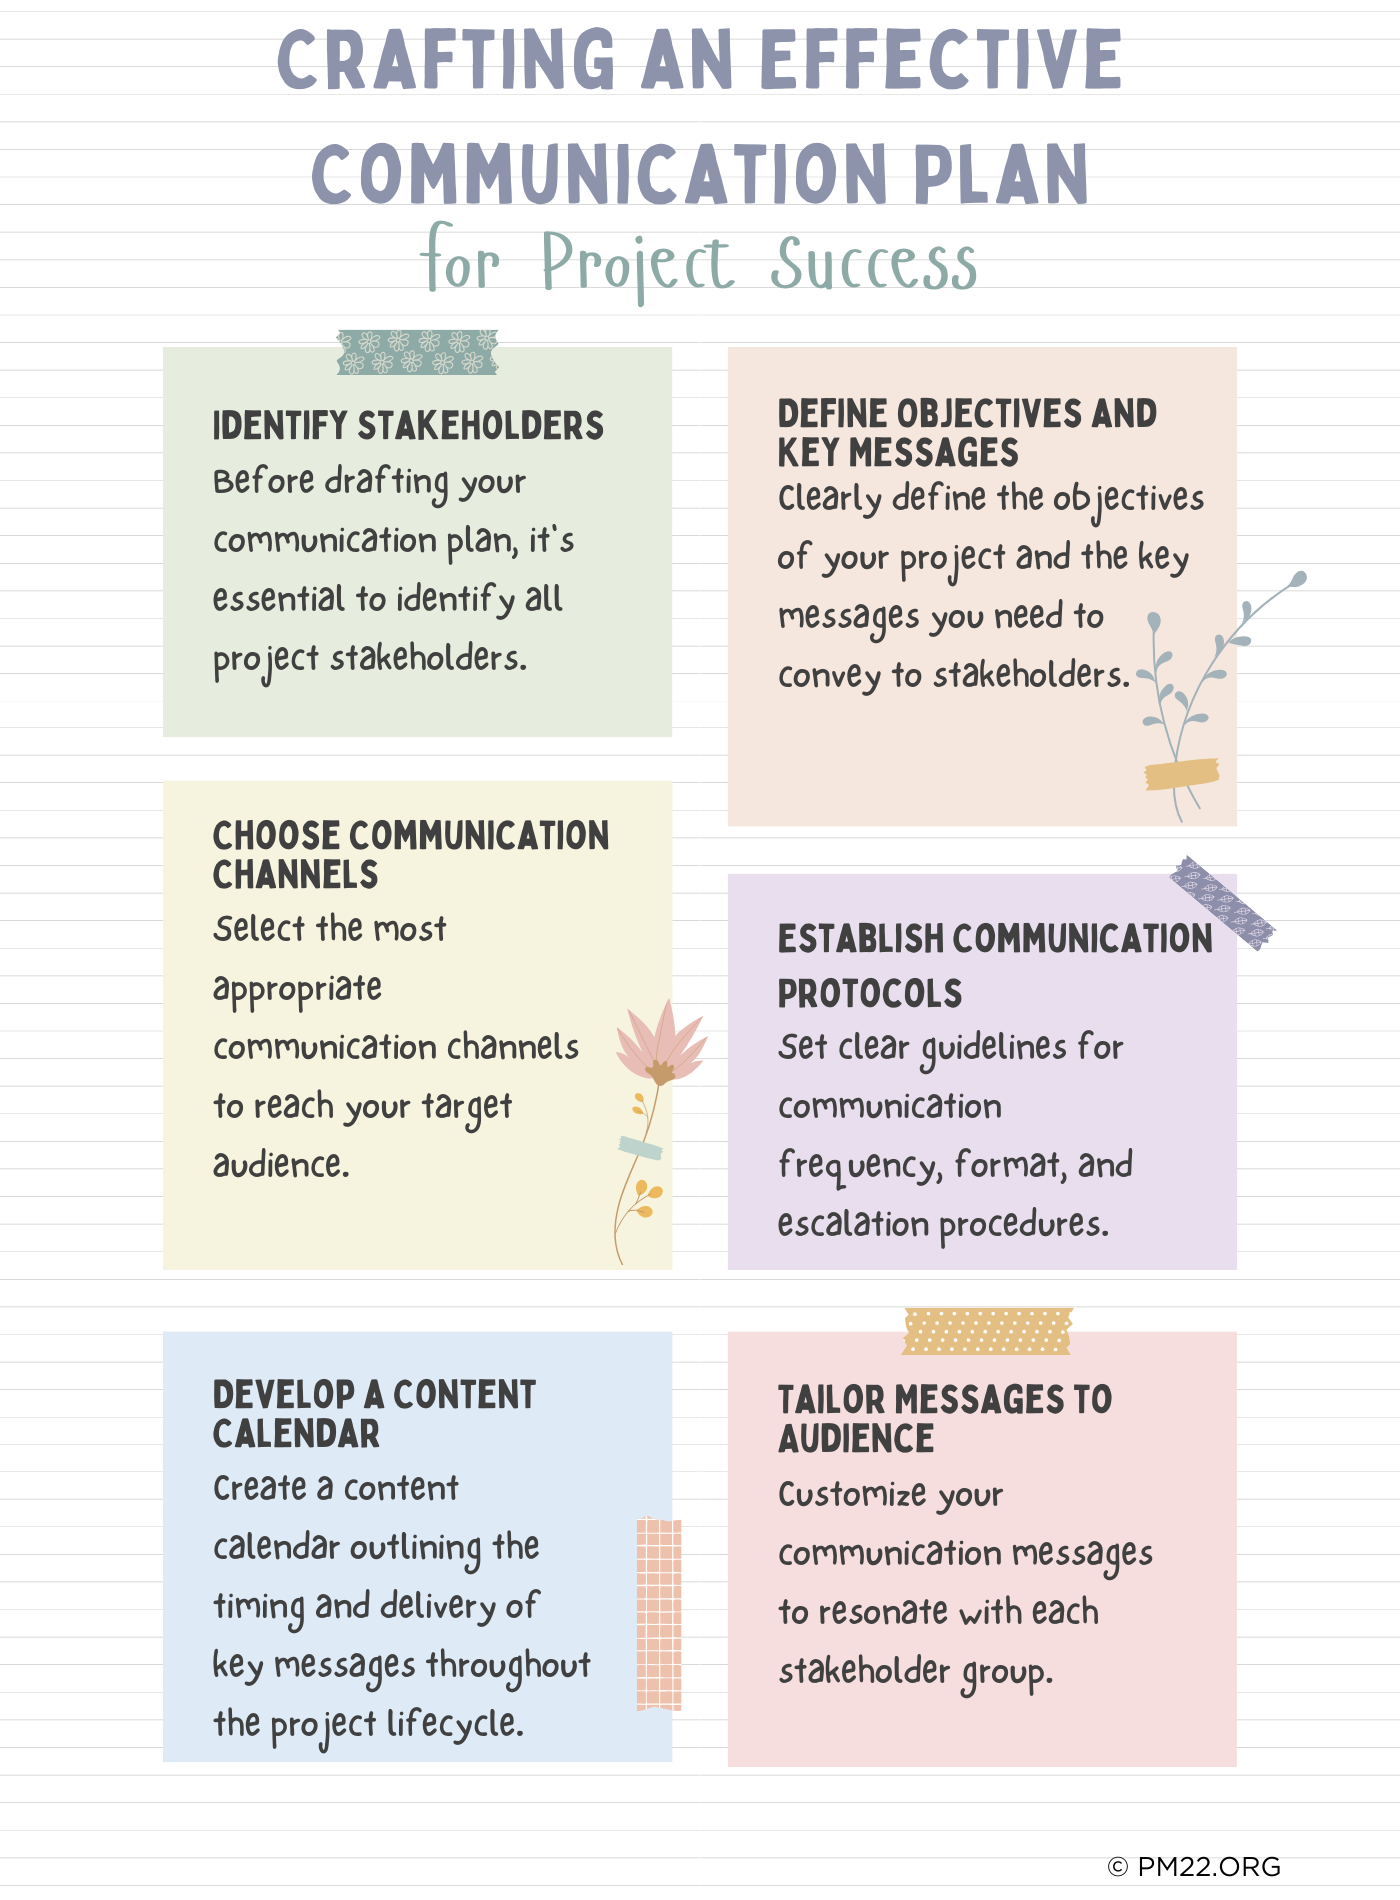 Crafting an Effective Communication Plan for Project Success